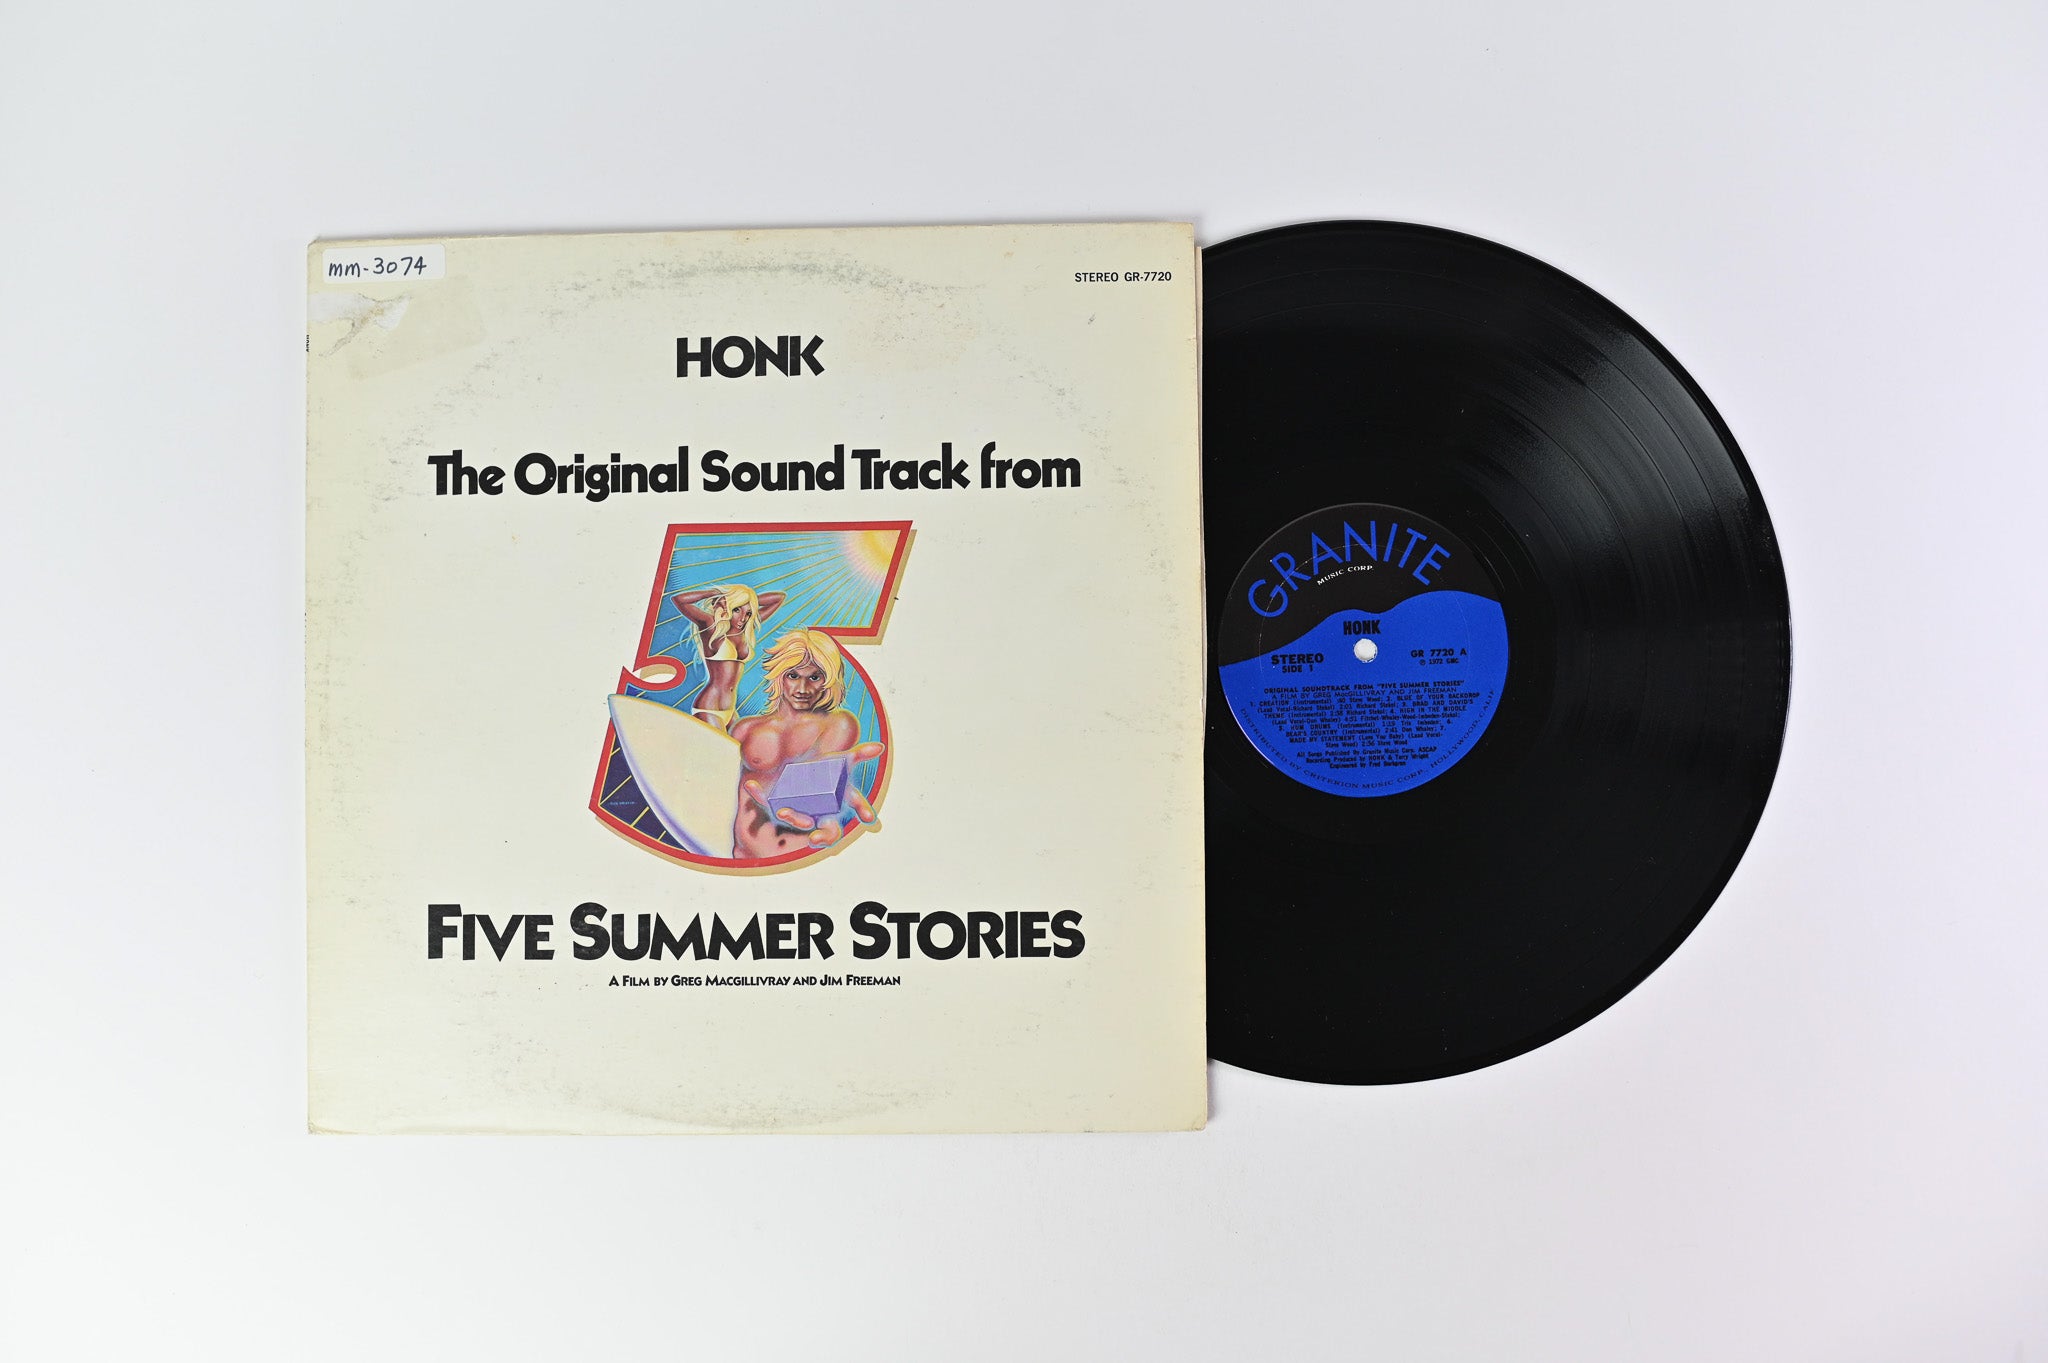 Honk - The Original Sound Track from Five Summer Stories on Granite Records